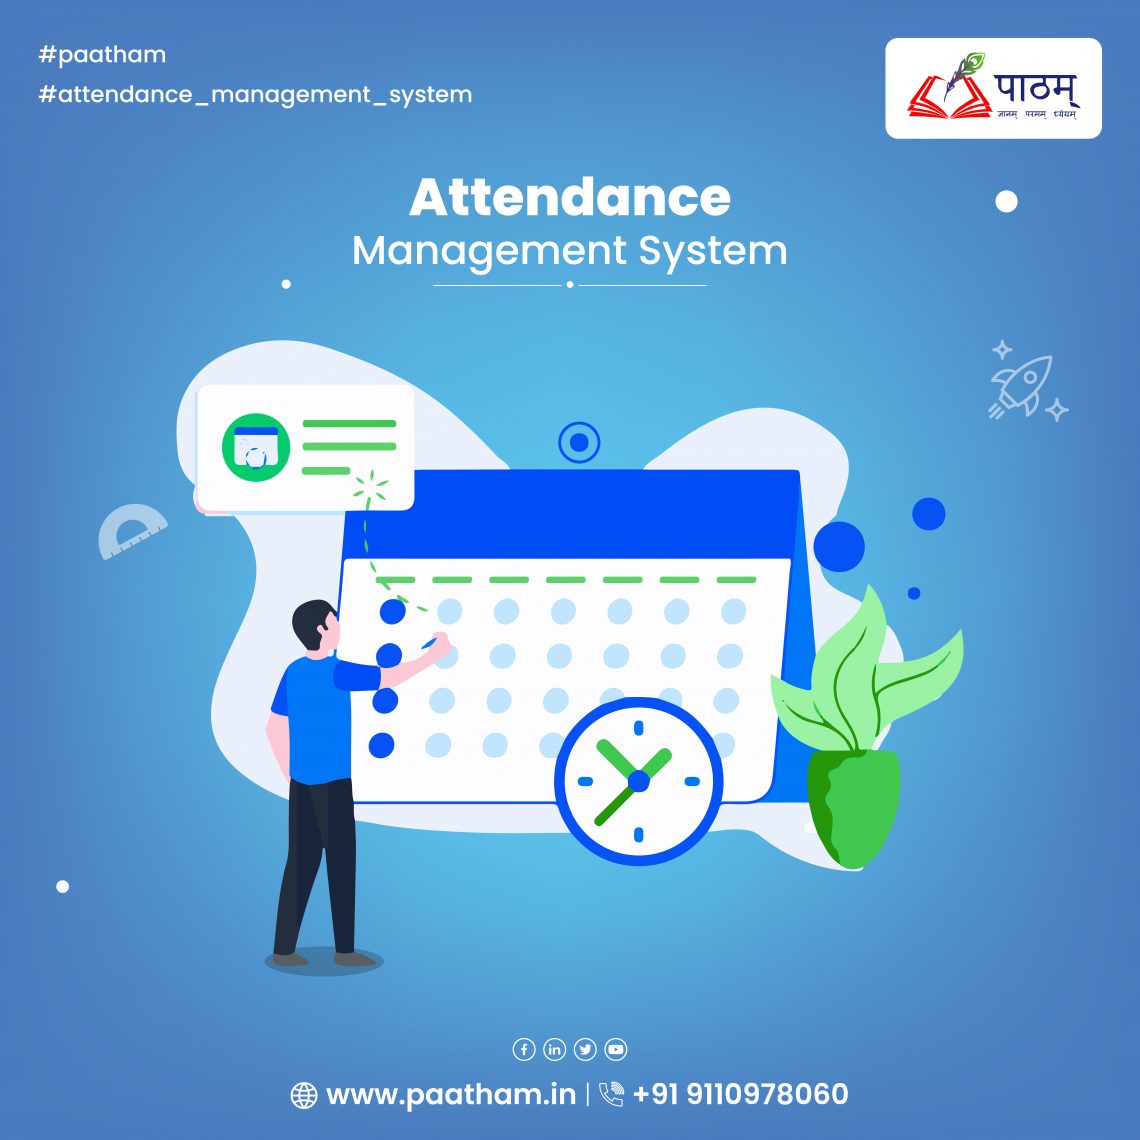 attendance-management-system-paatham